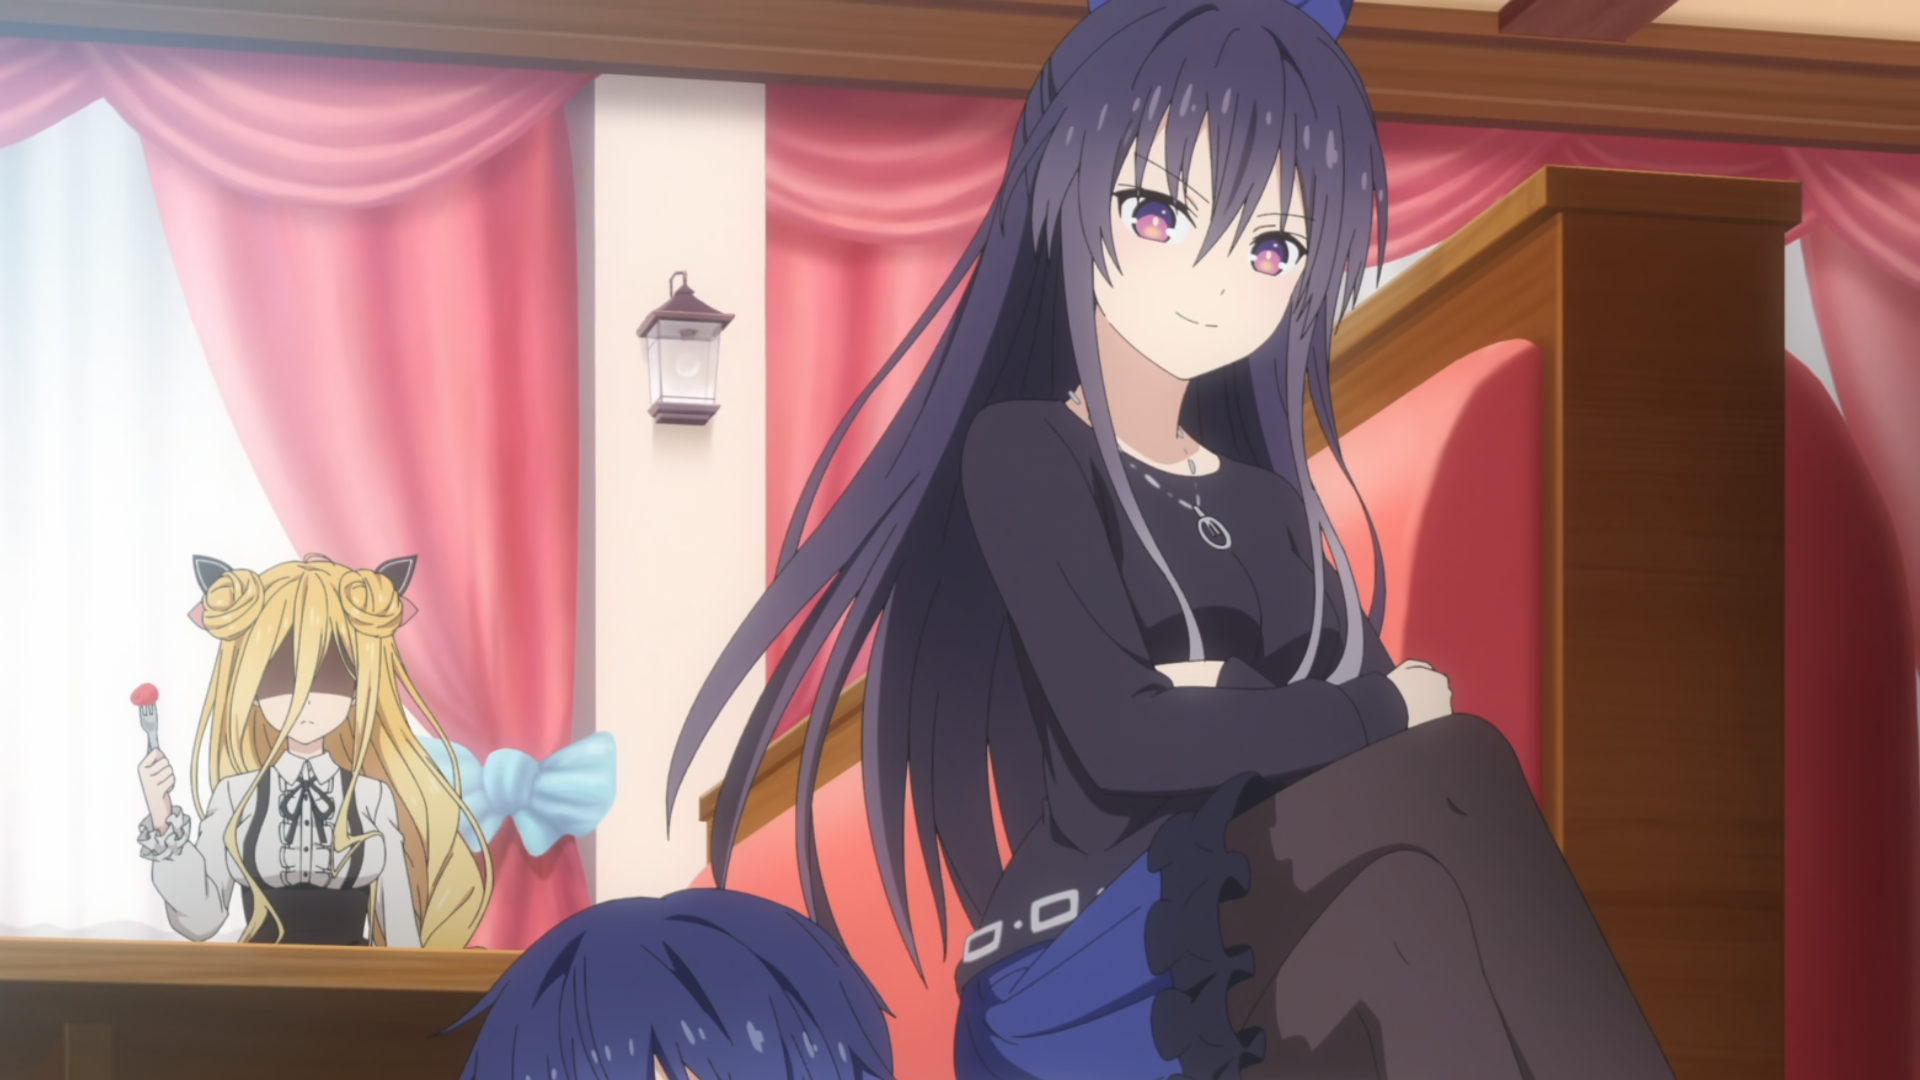 Date A Live IV Anime Will Continue the Story of Shido and the Spirits